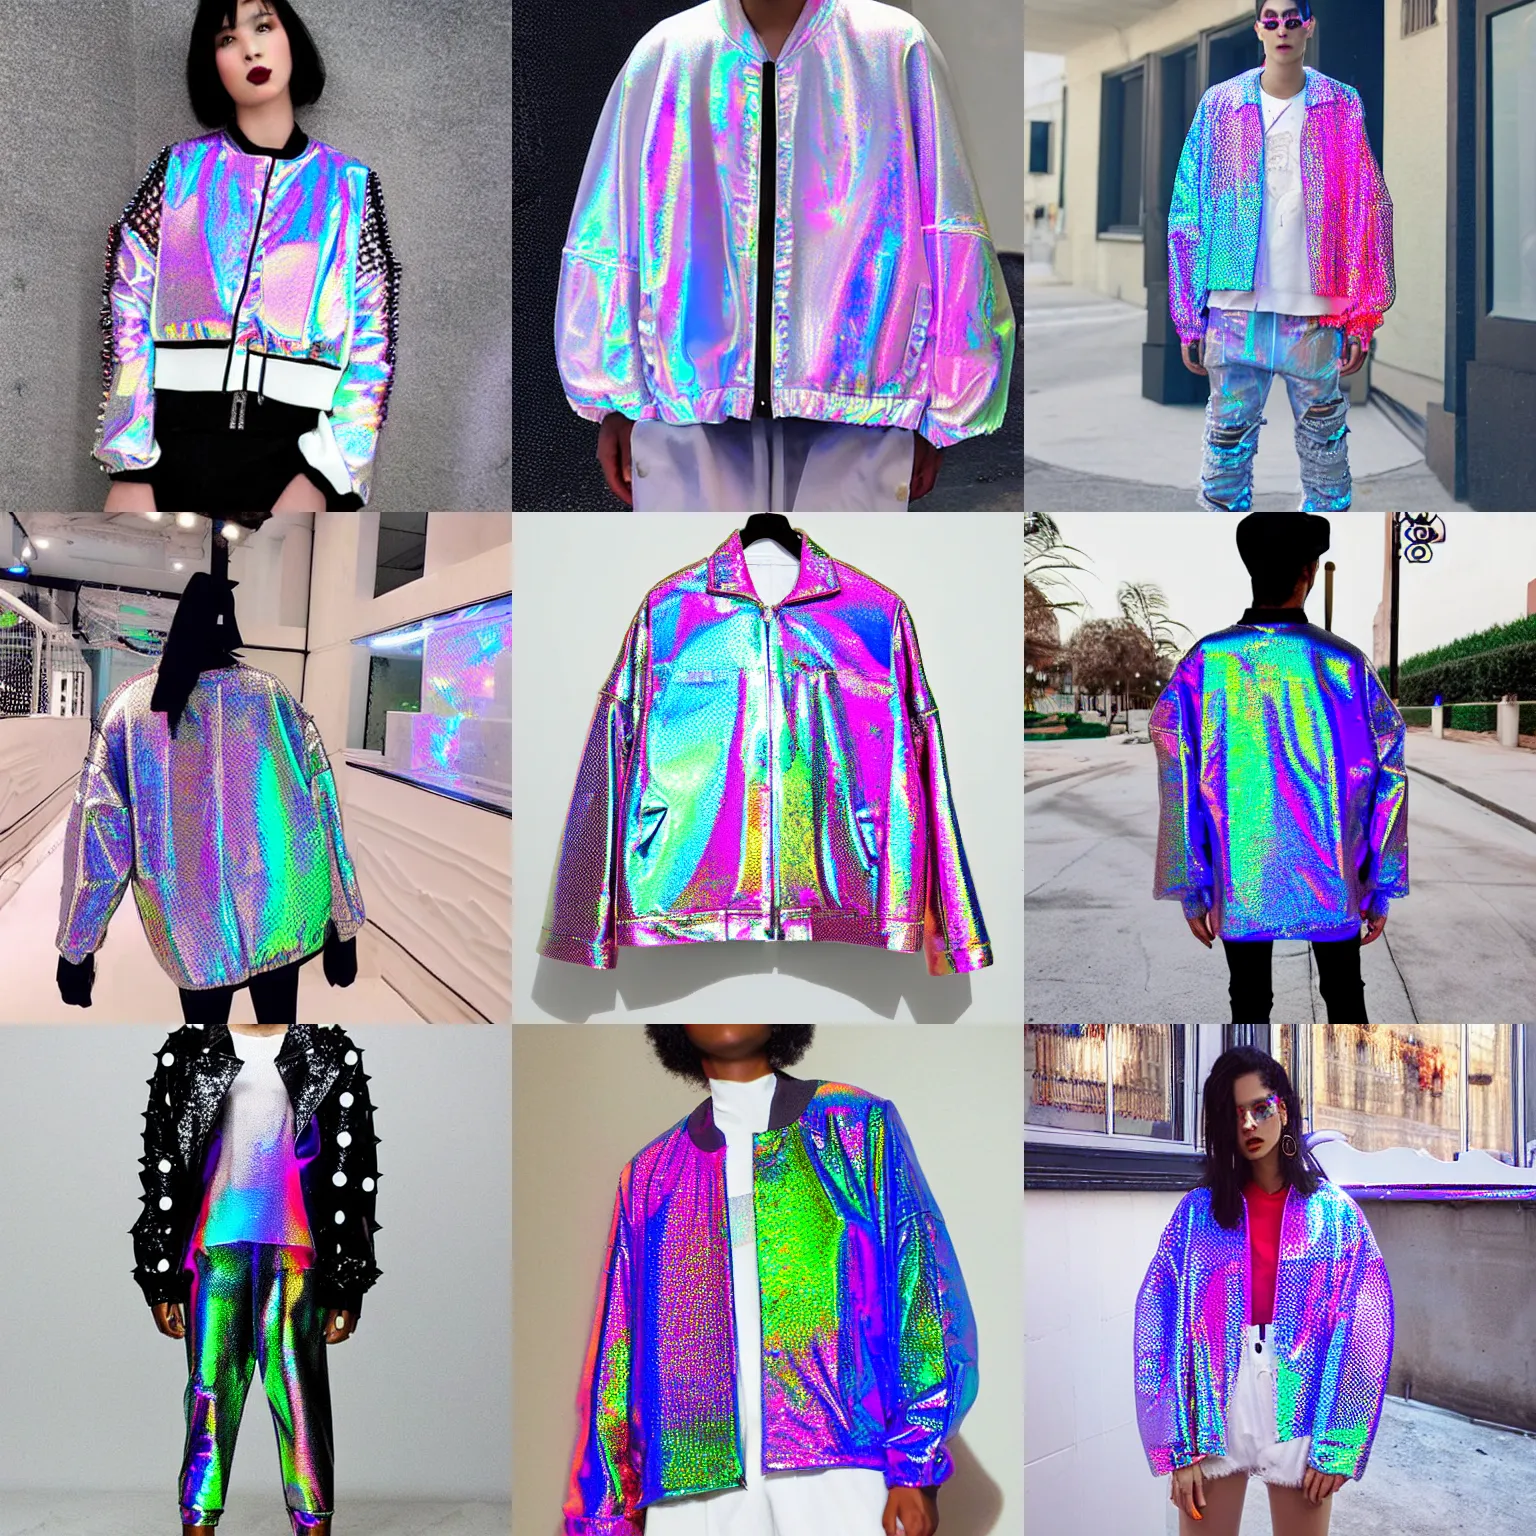 Prompt: a white holographic oversized jacket inspired by jawbreaker candy, vaporwave mall aesthetic, dots, netting, spikes, fashionable, trendy, colorful